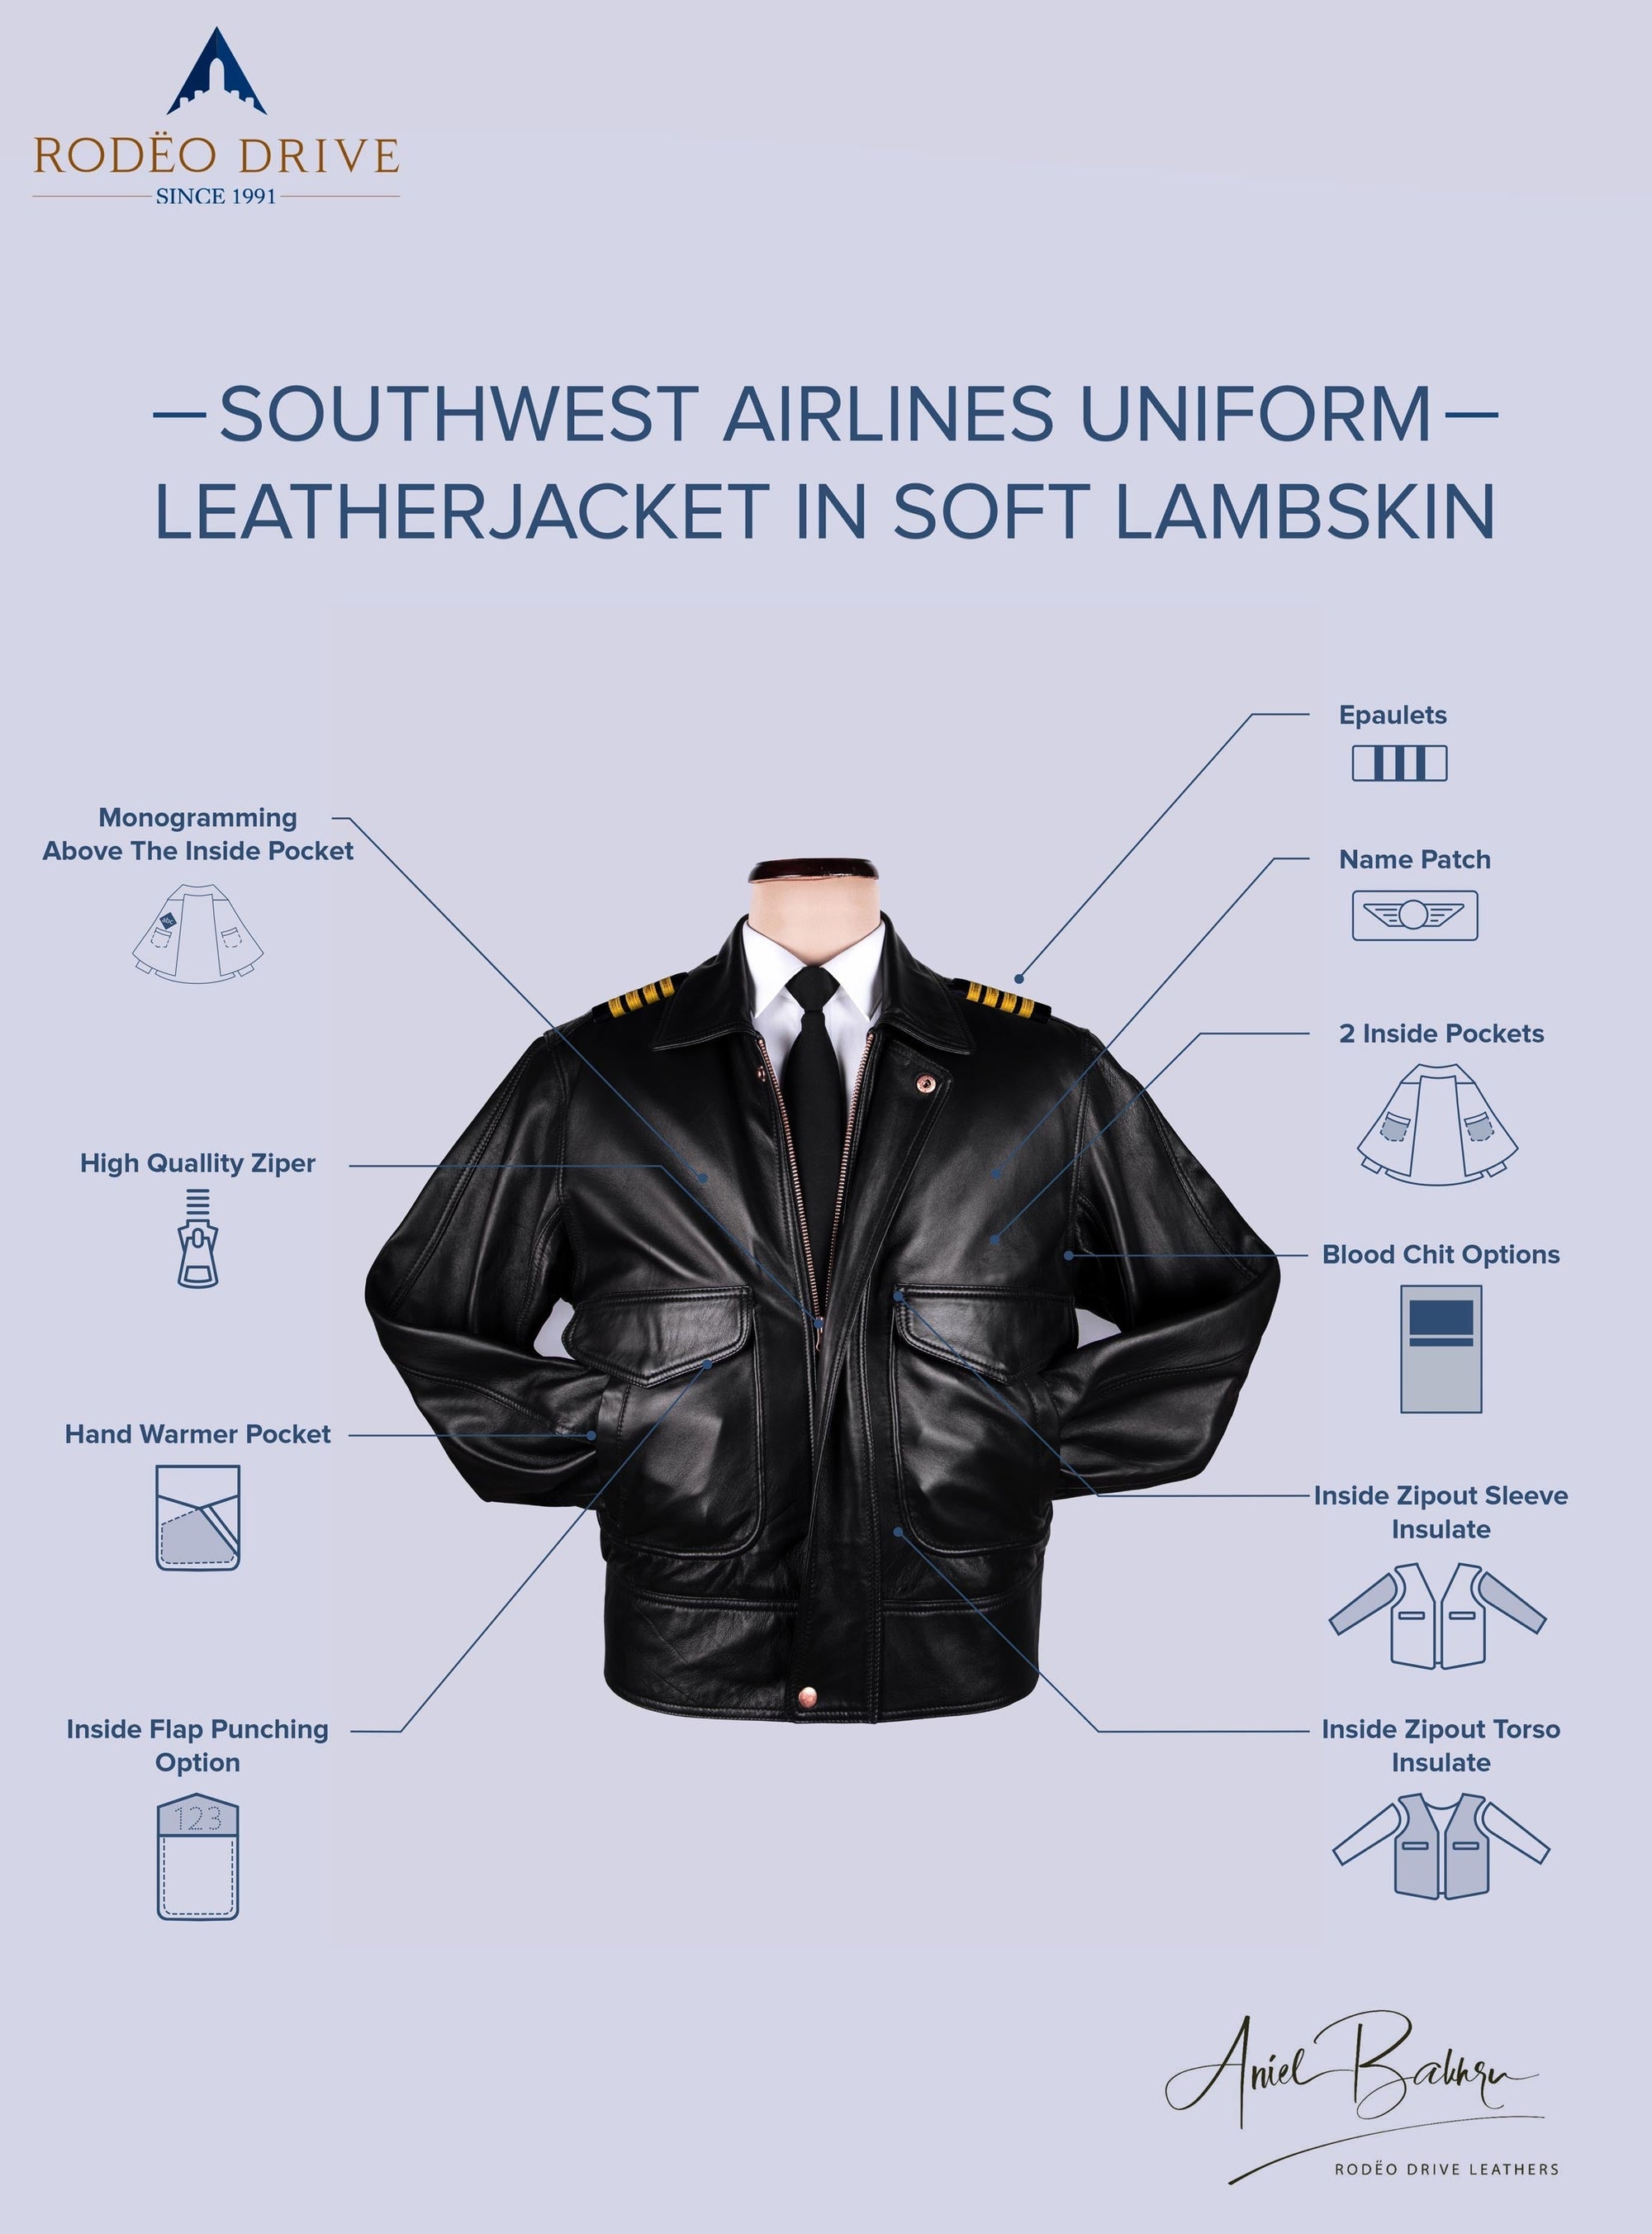 Southwest airlines uniform leather jacket in soft lambskins features displayed